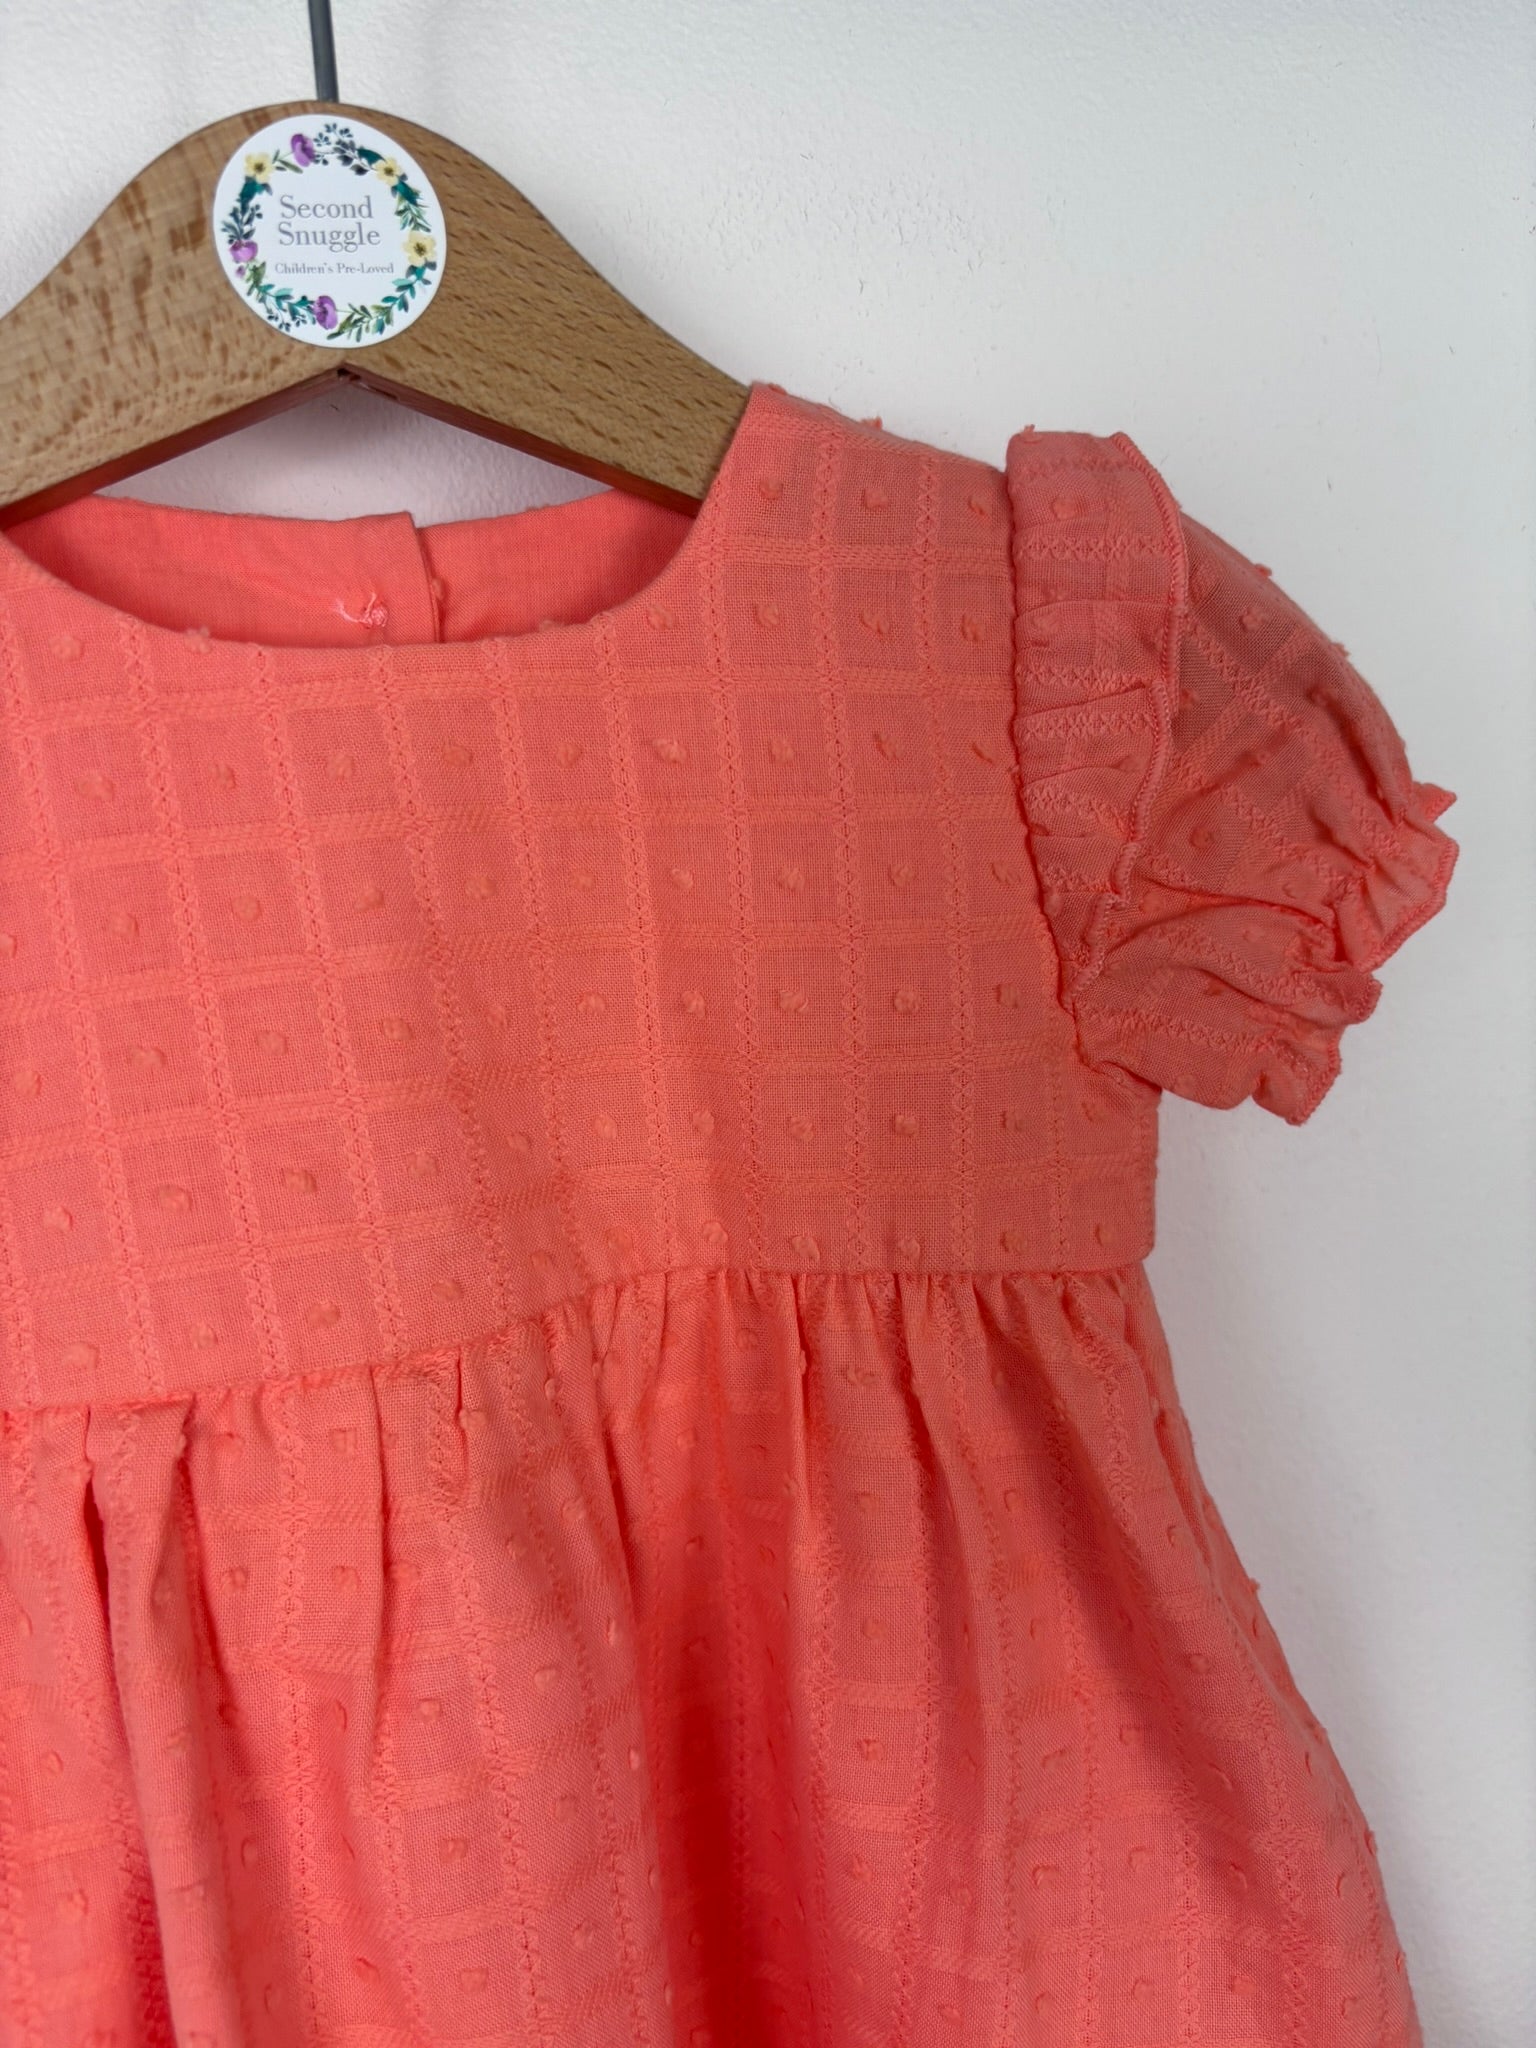 Benetton Baby 3-6 Months-Dresses-Second Snuggle Preloved